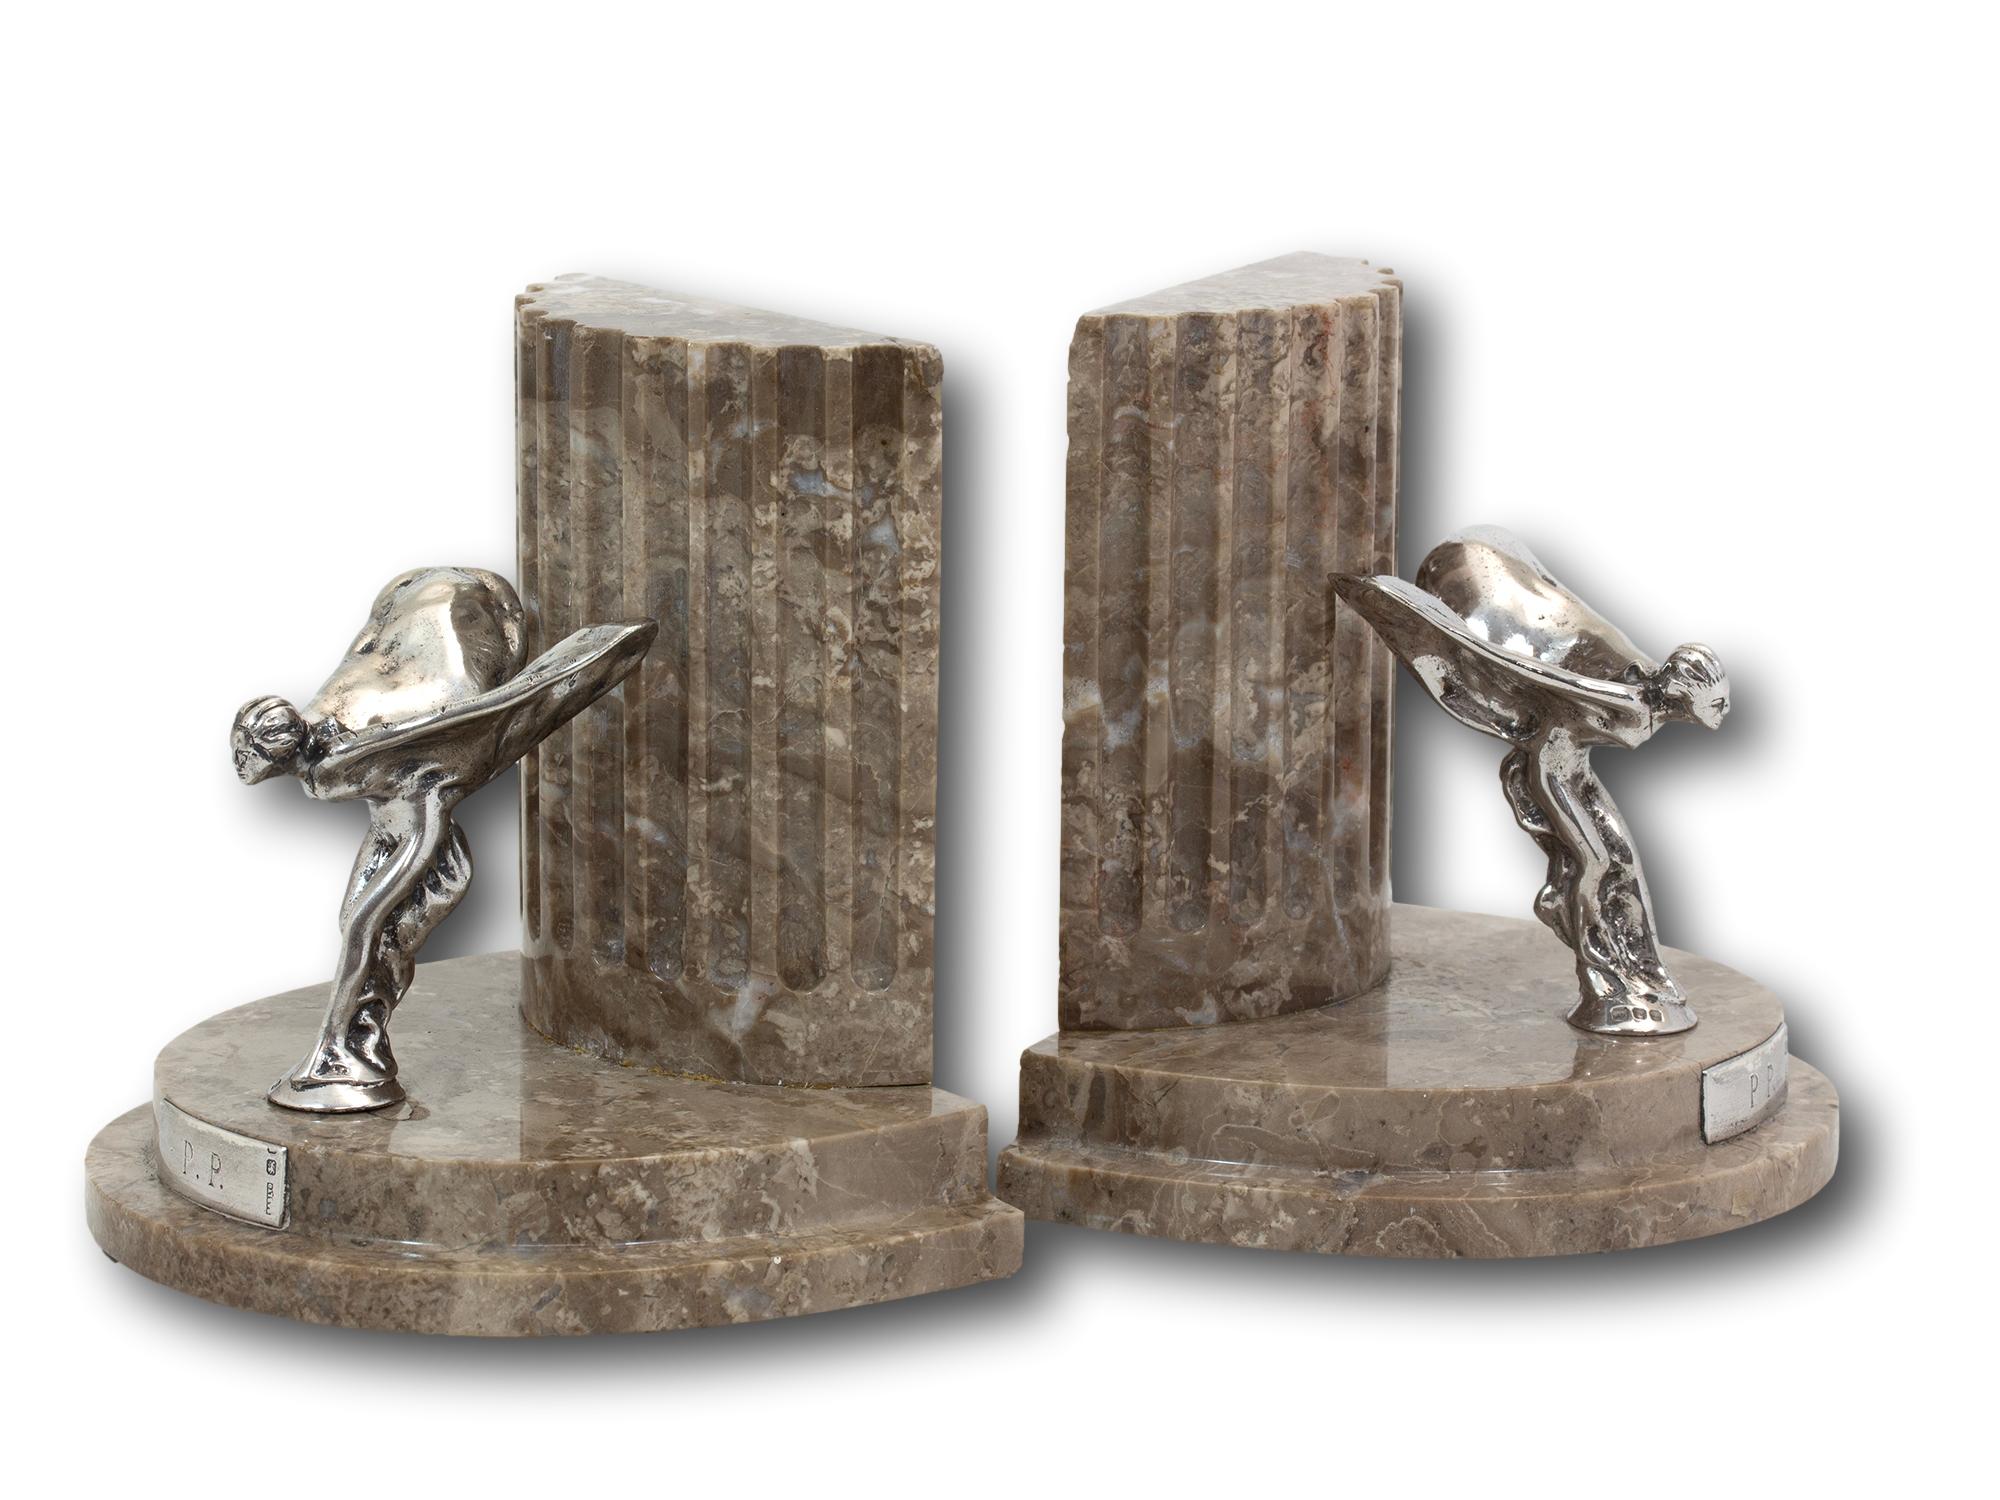 Marble Columns

From our Accessories collection, we are delighted to offer a very rare pair of Silver Spirit of Ecstasy Book Ends. The Book End mounts are carved from marble with demi-lune stepped plinth bases and fluted columns. The miniature